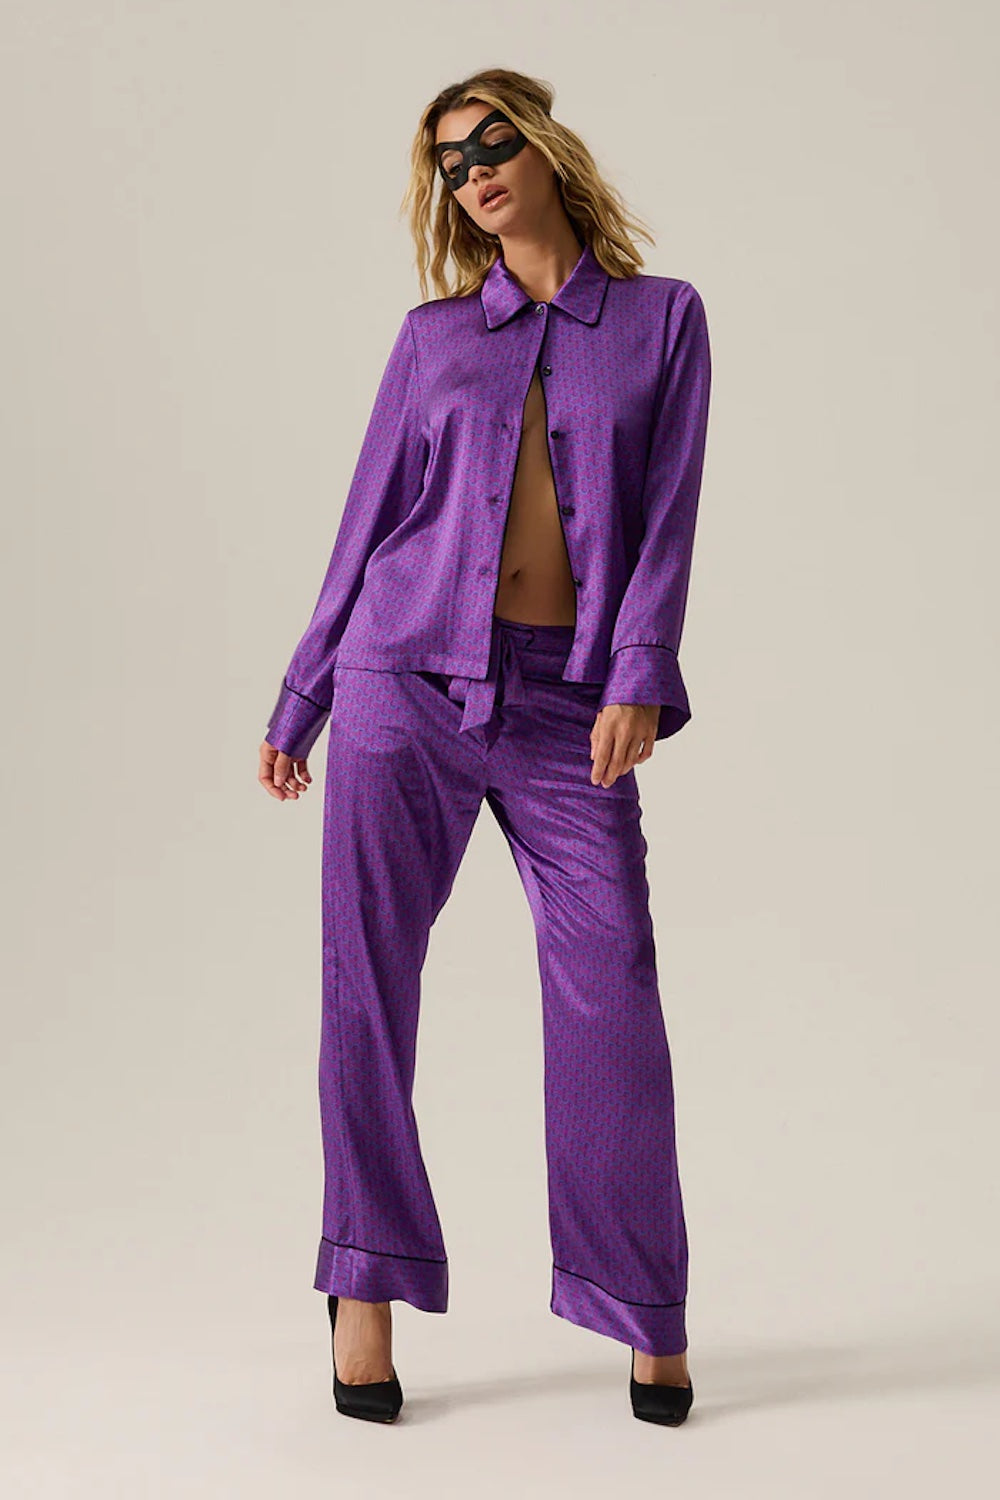 Handcuff Silk Lounge Top French Violet